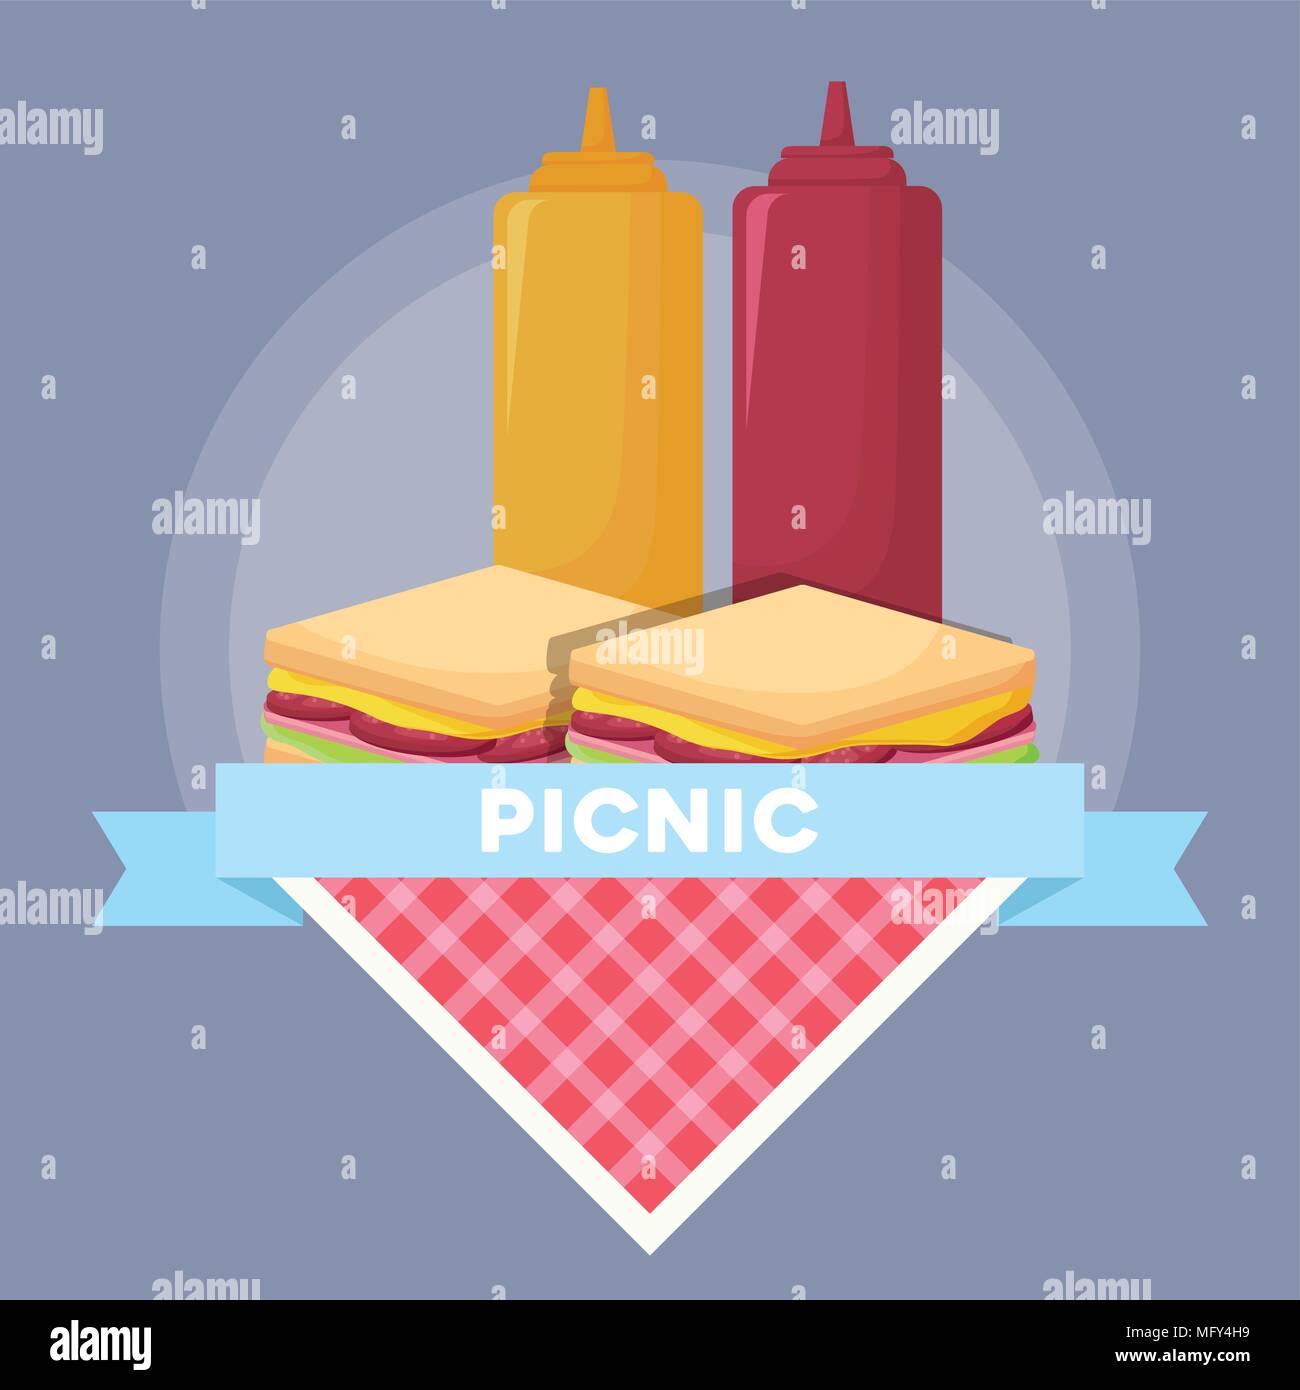 emblem of picnic concept with sandwichs and sauces bottles over purple background, colorful design. vector illustration Stock Vector